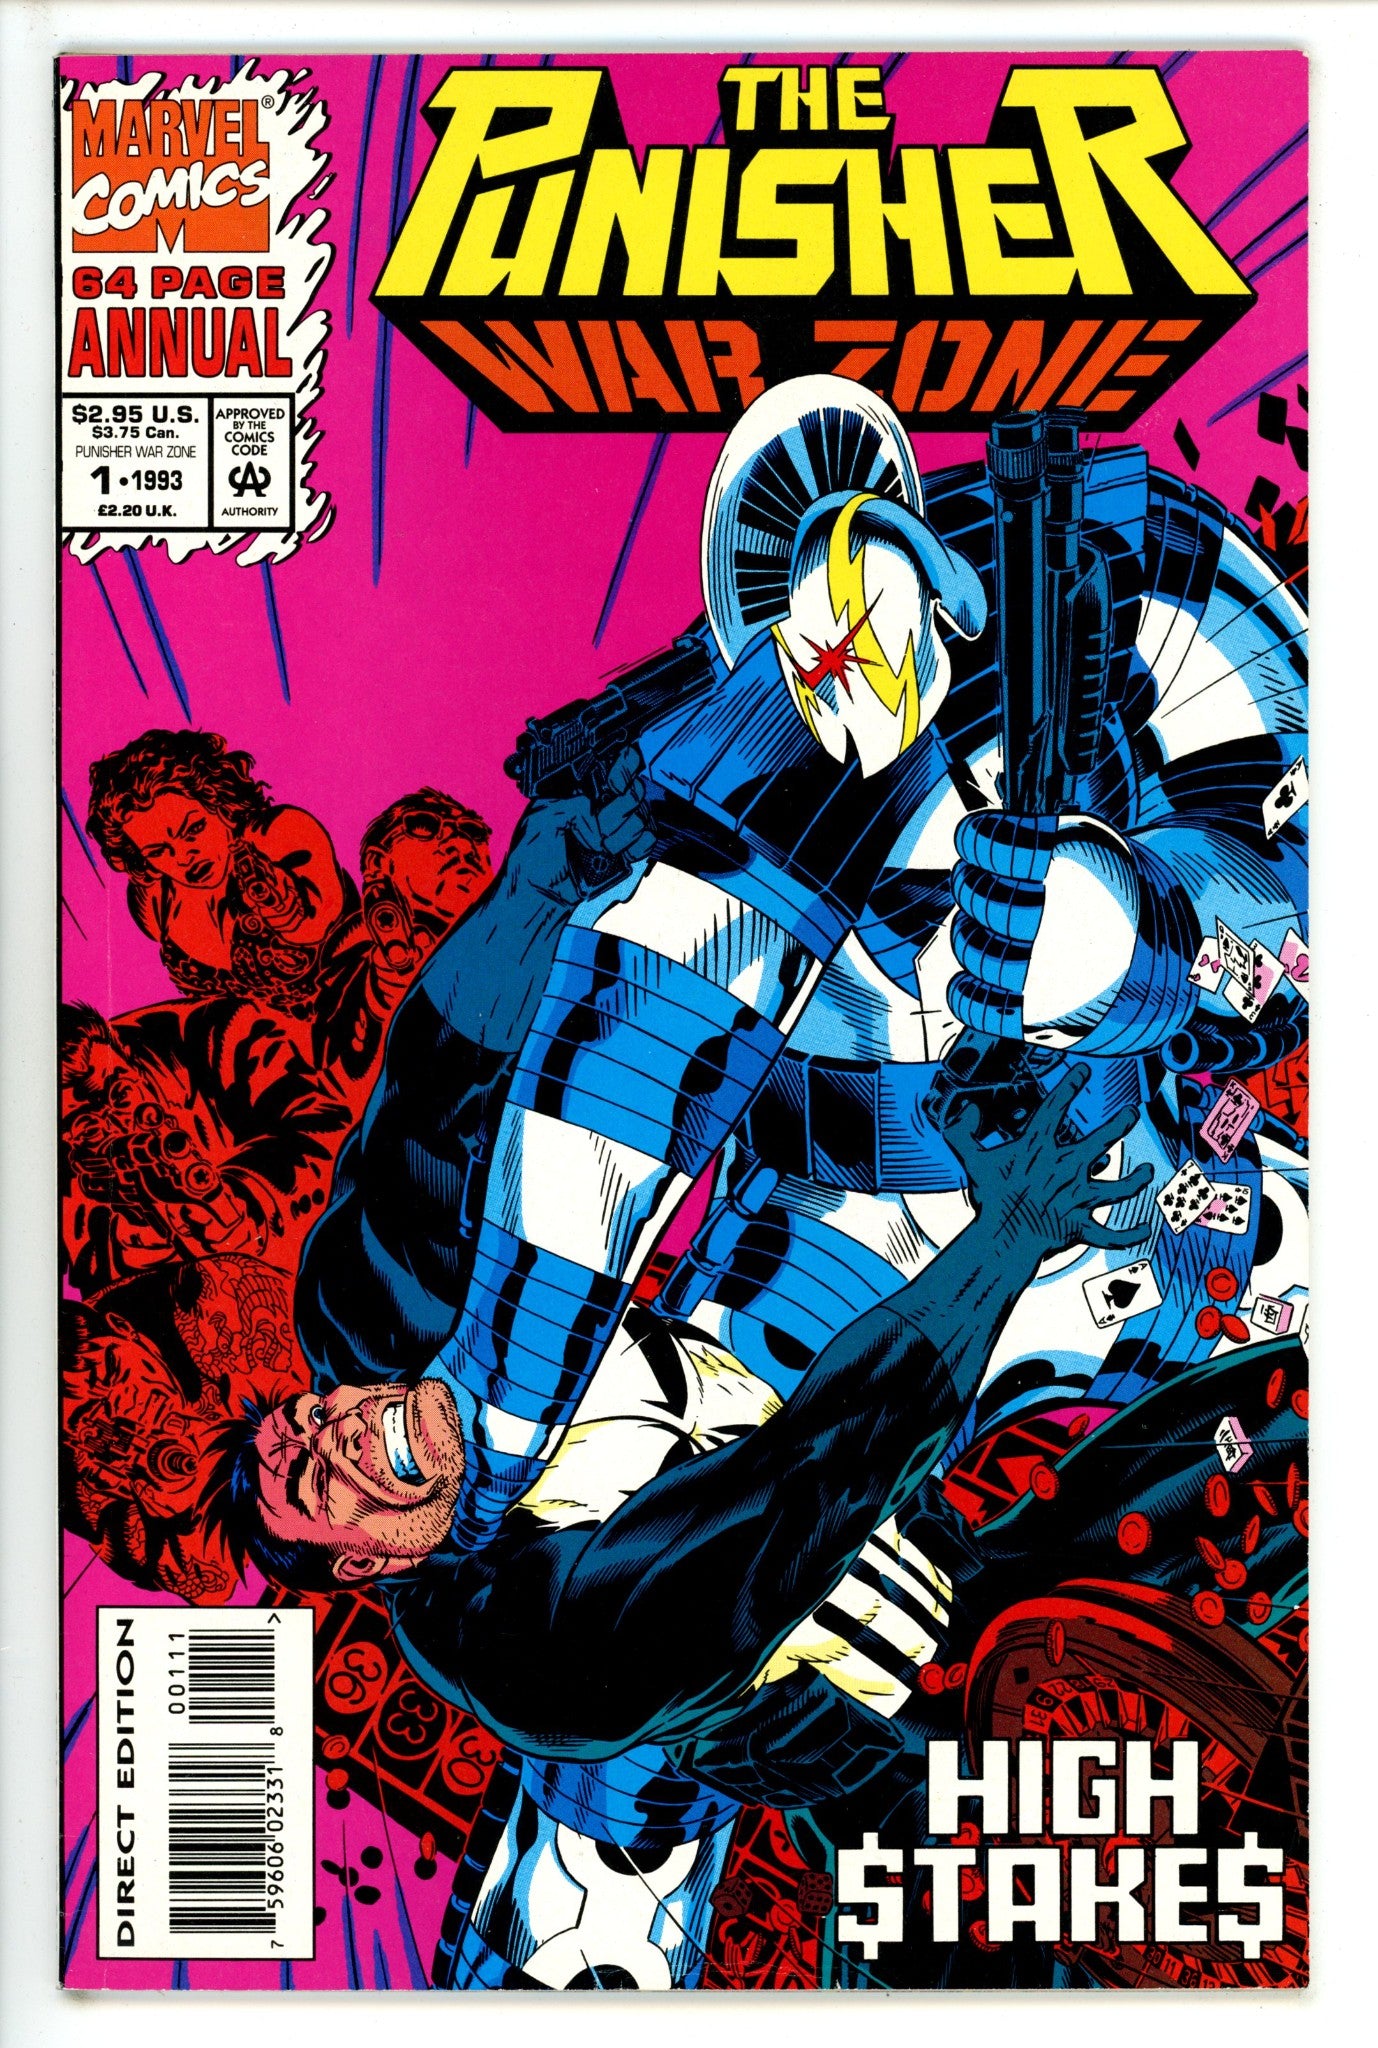 The Punisher: War Zone Annual Vol 1 1 (1993)